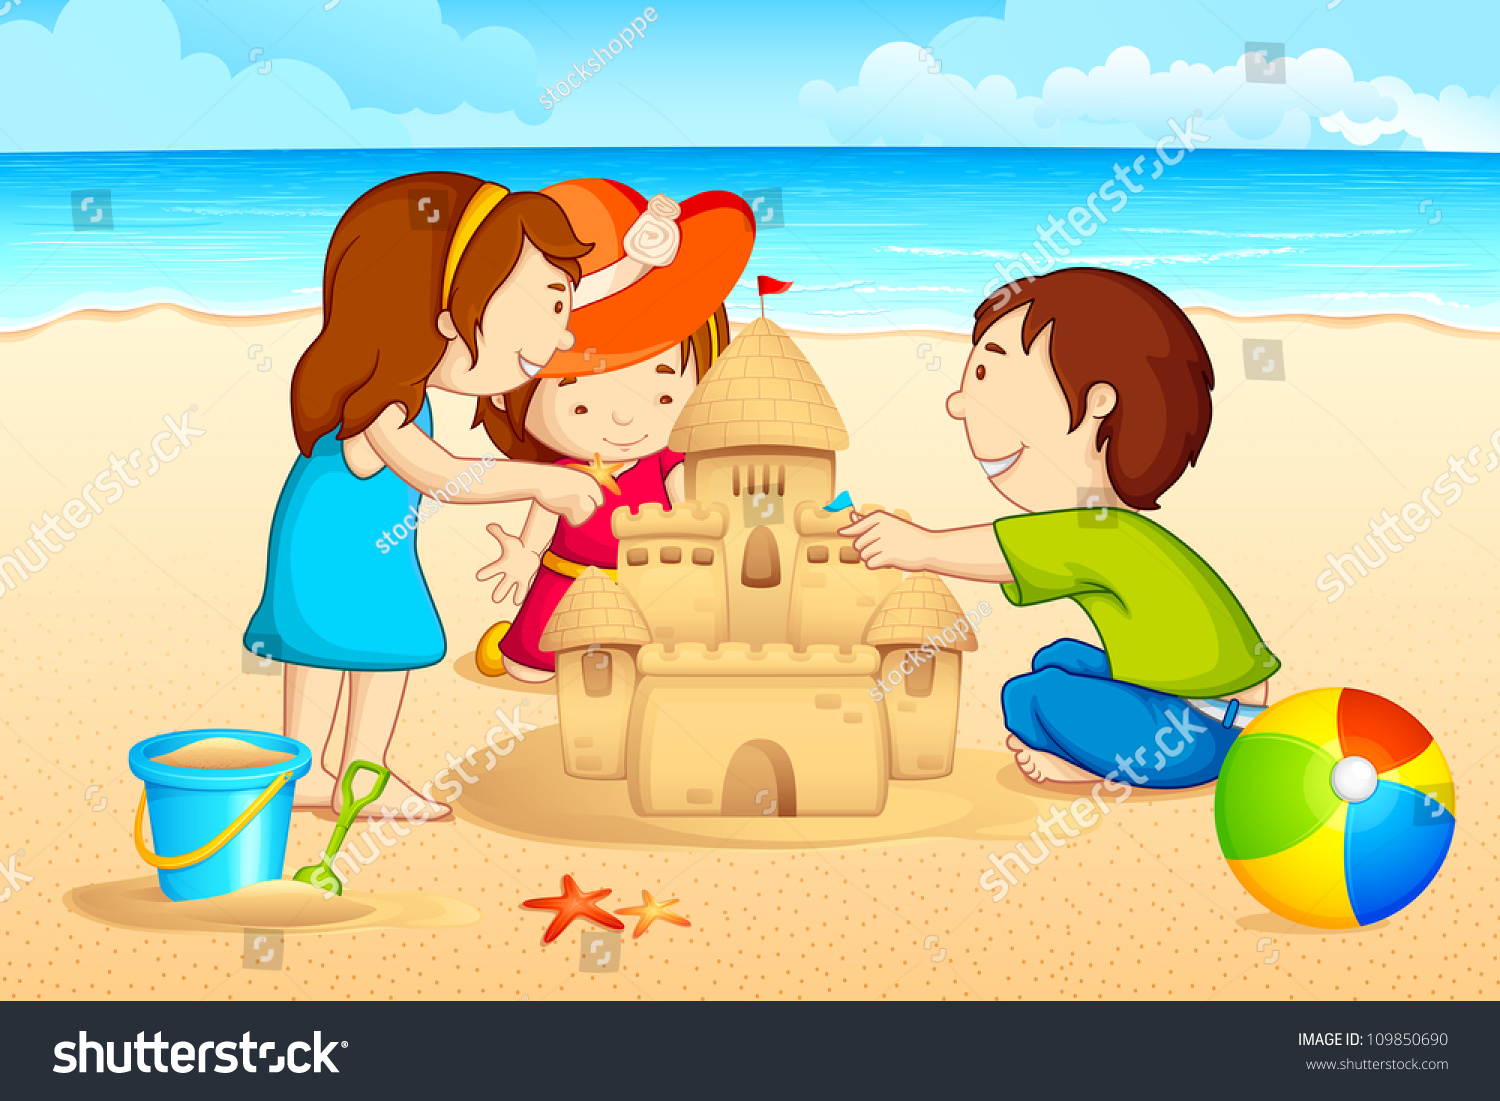 clipart family at the beach - photo #47